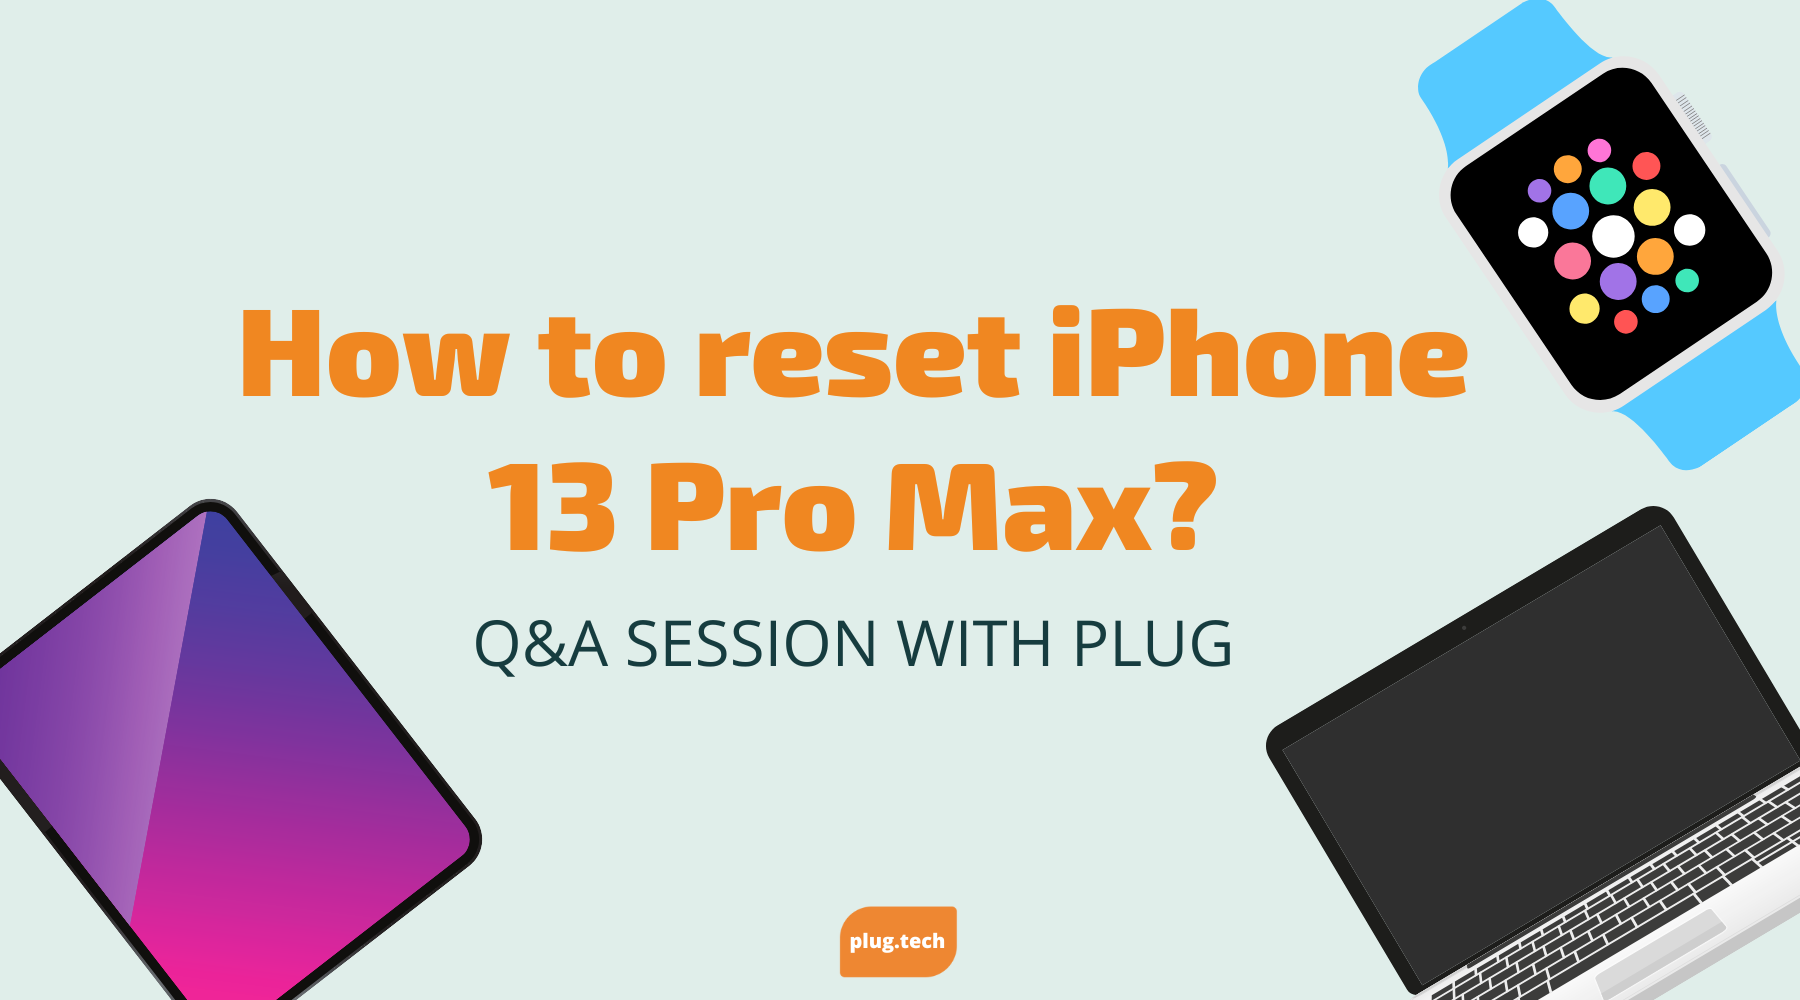 How to reset iPhone 13 Pro Max?